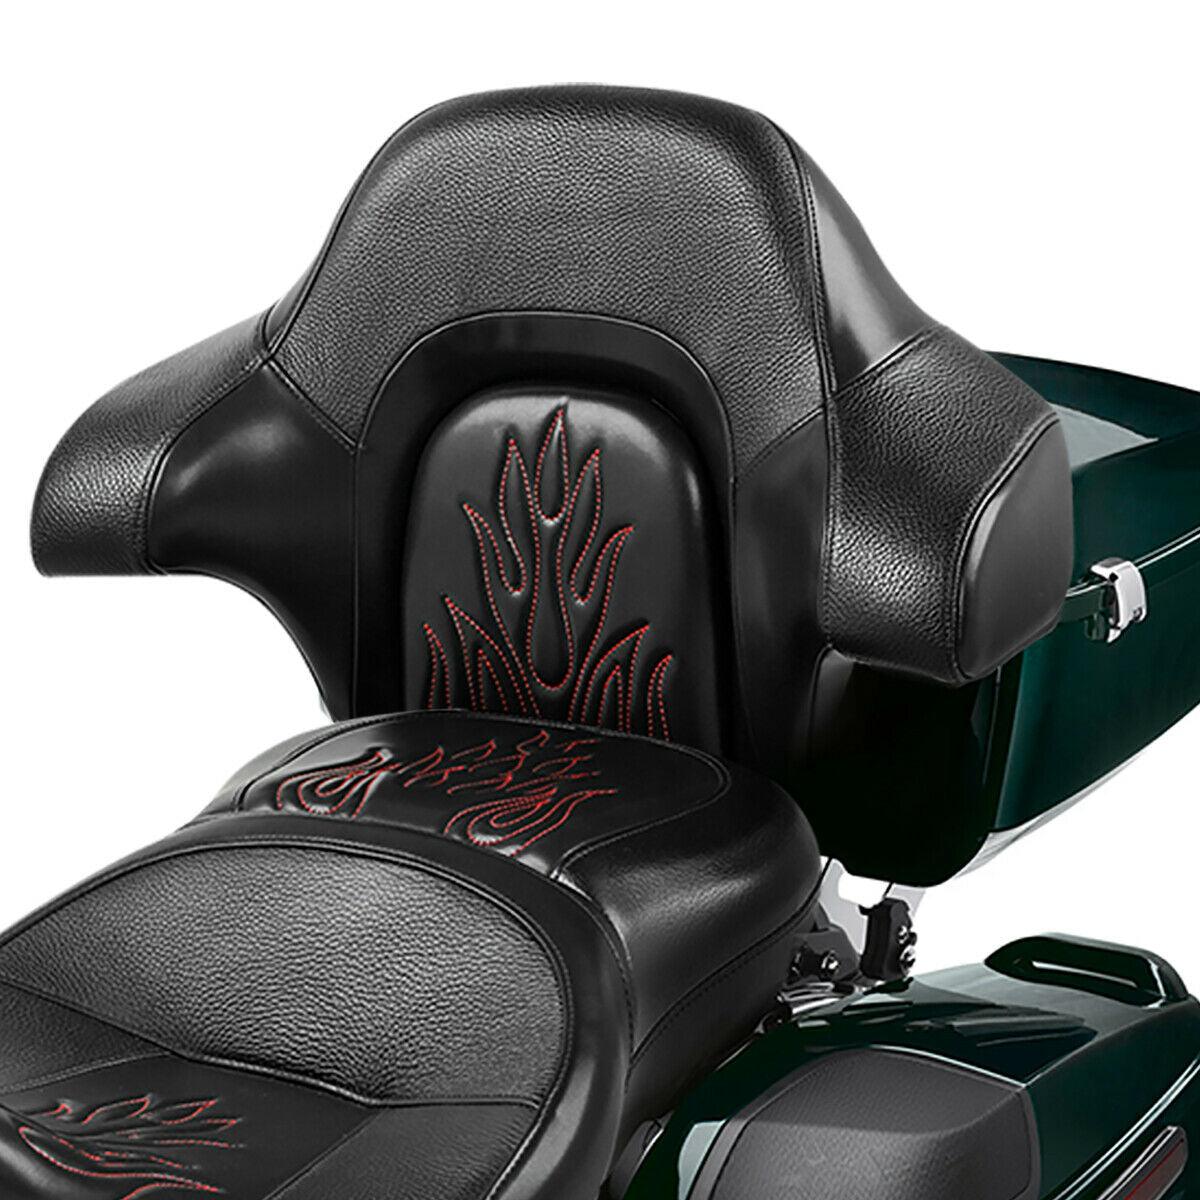 Black Passenger King Backrest Pad Fit For Harley CVO Touring Road Glide 2014-Up - Moto Life Products